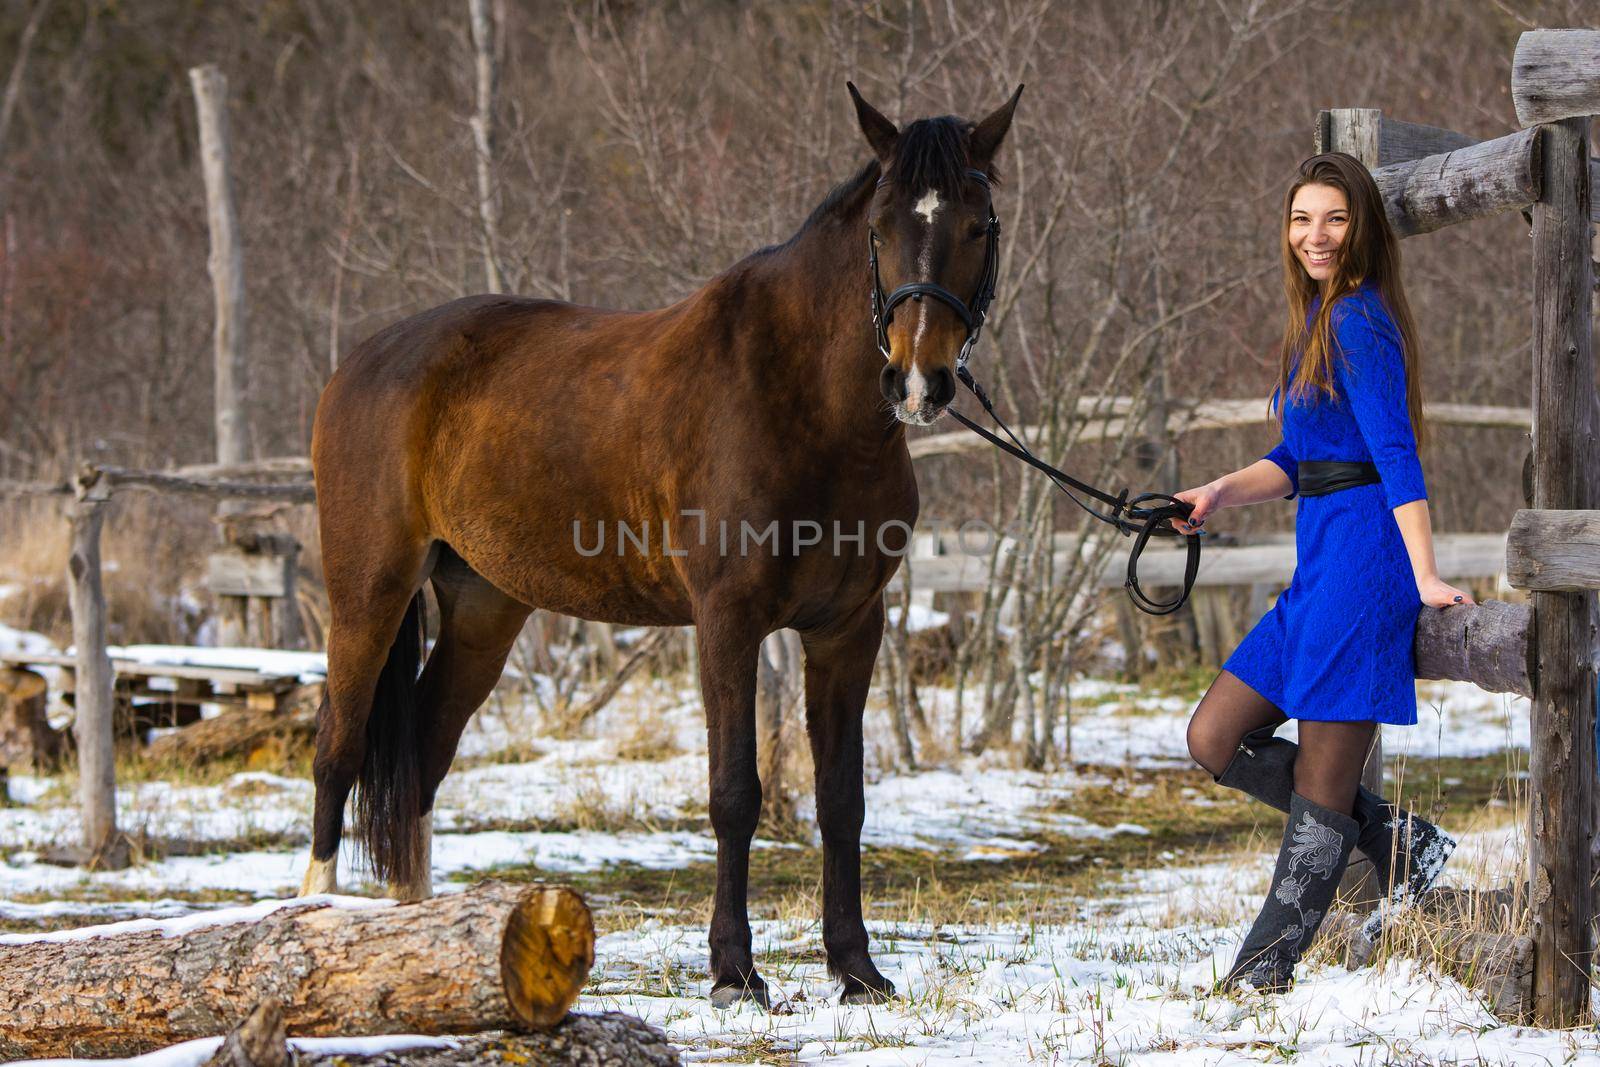 A beautiful girl in a short blue dress walks with a horse at an old farm in winter, the girl smiles and looks into the frame by Madhourse